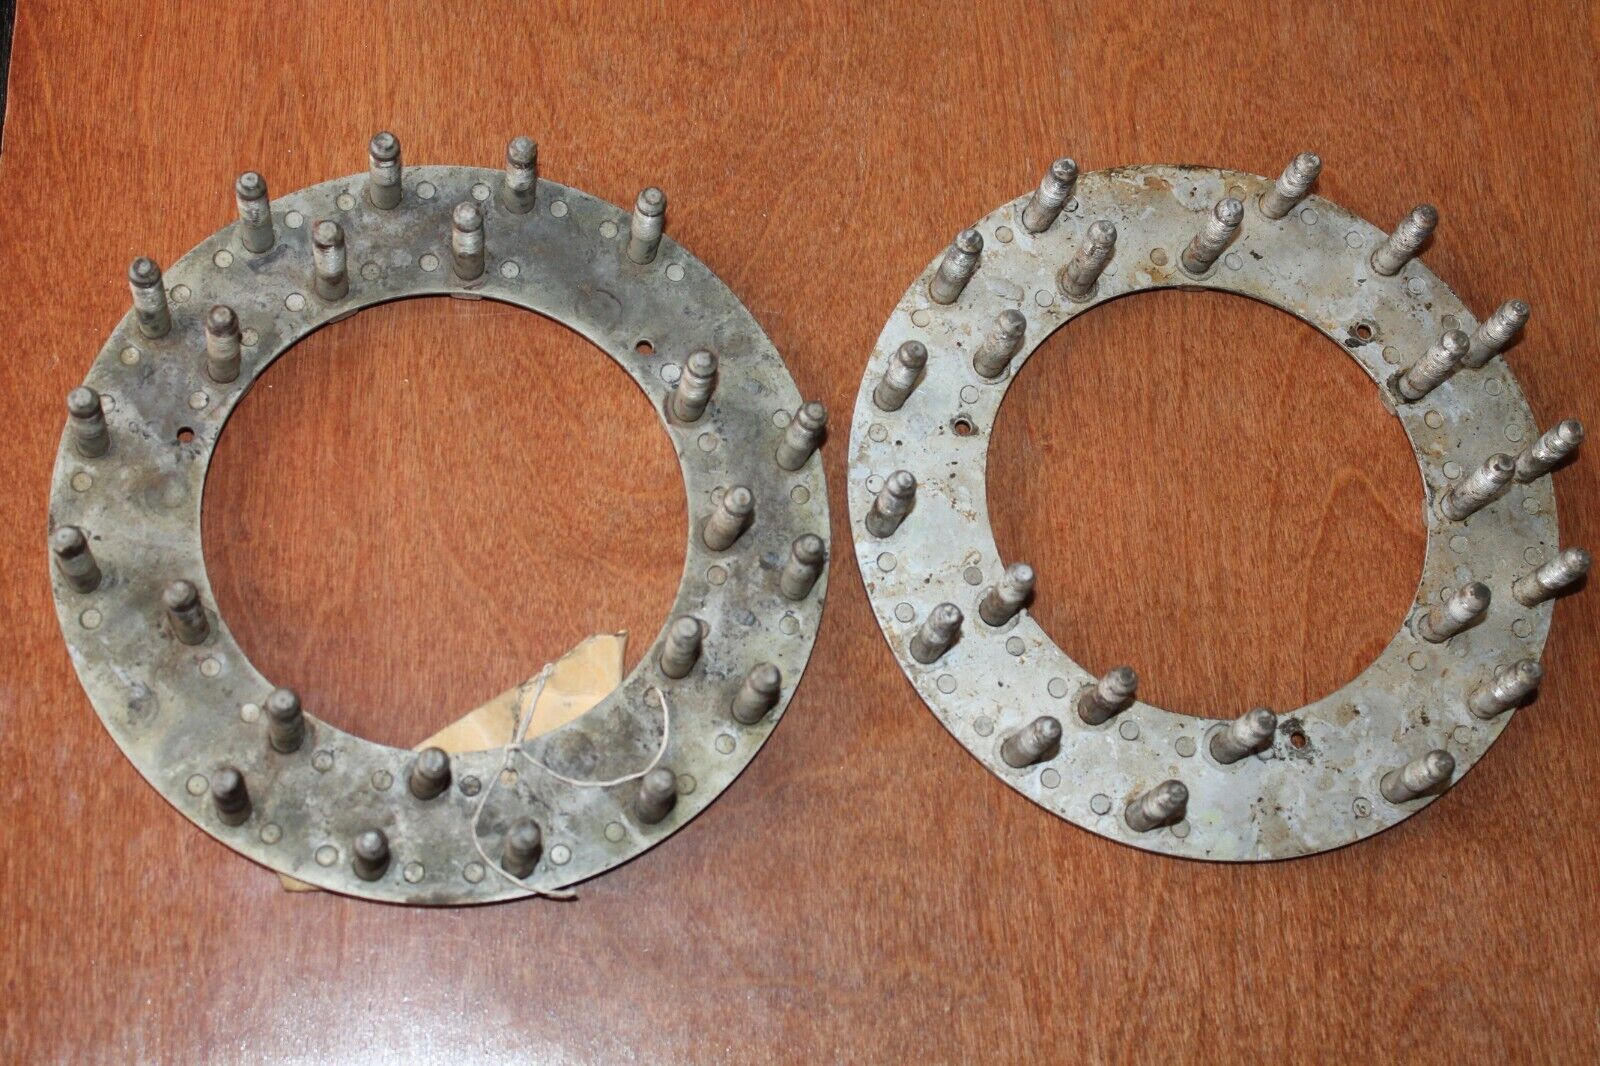 Sikorsky S76 Helicopter Spacers S1635-91030